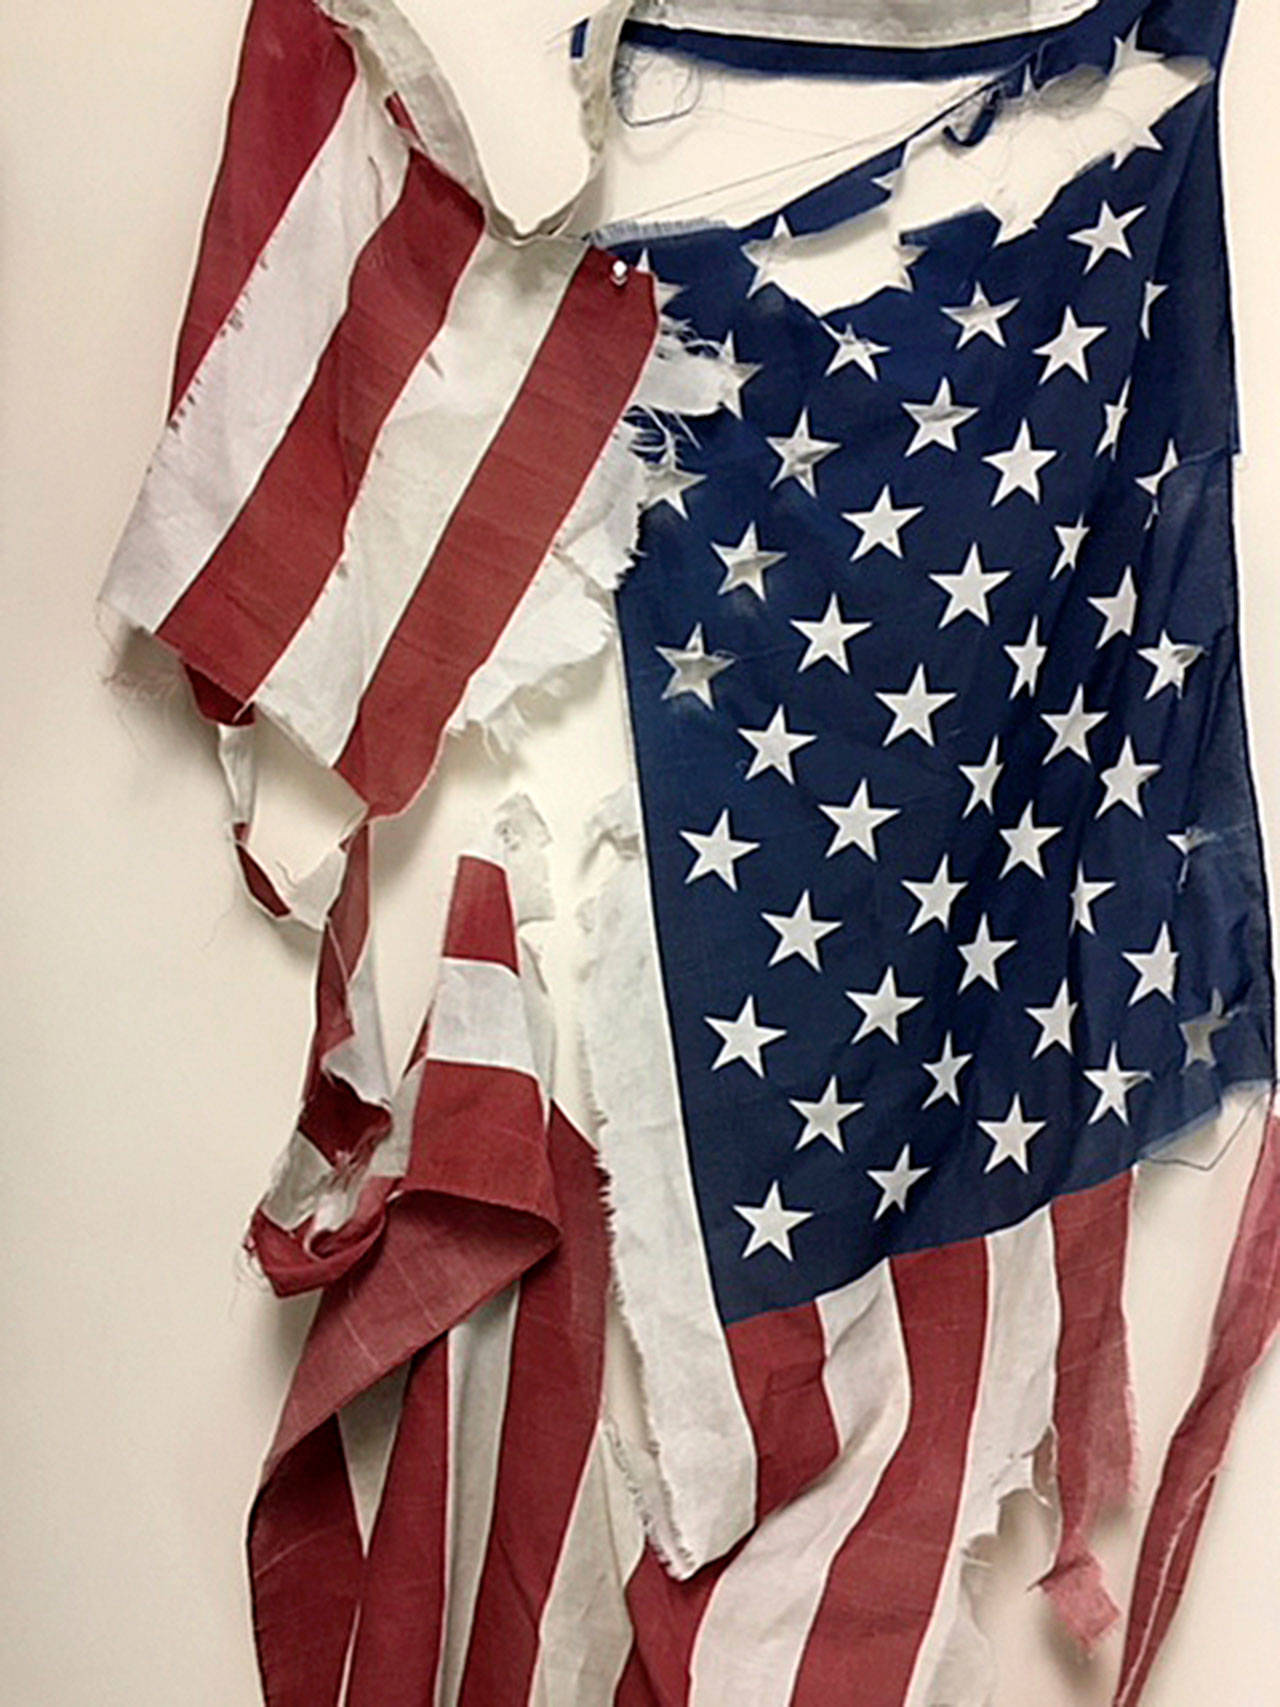 The Post 1741 will provide a free, new 3-by-5-foot American flag to replace a worn or tattered one of similar size within the jurisdiction of Post 1741. COURTESY PHOTO